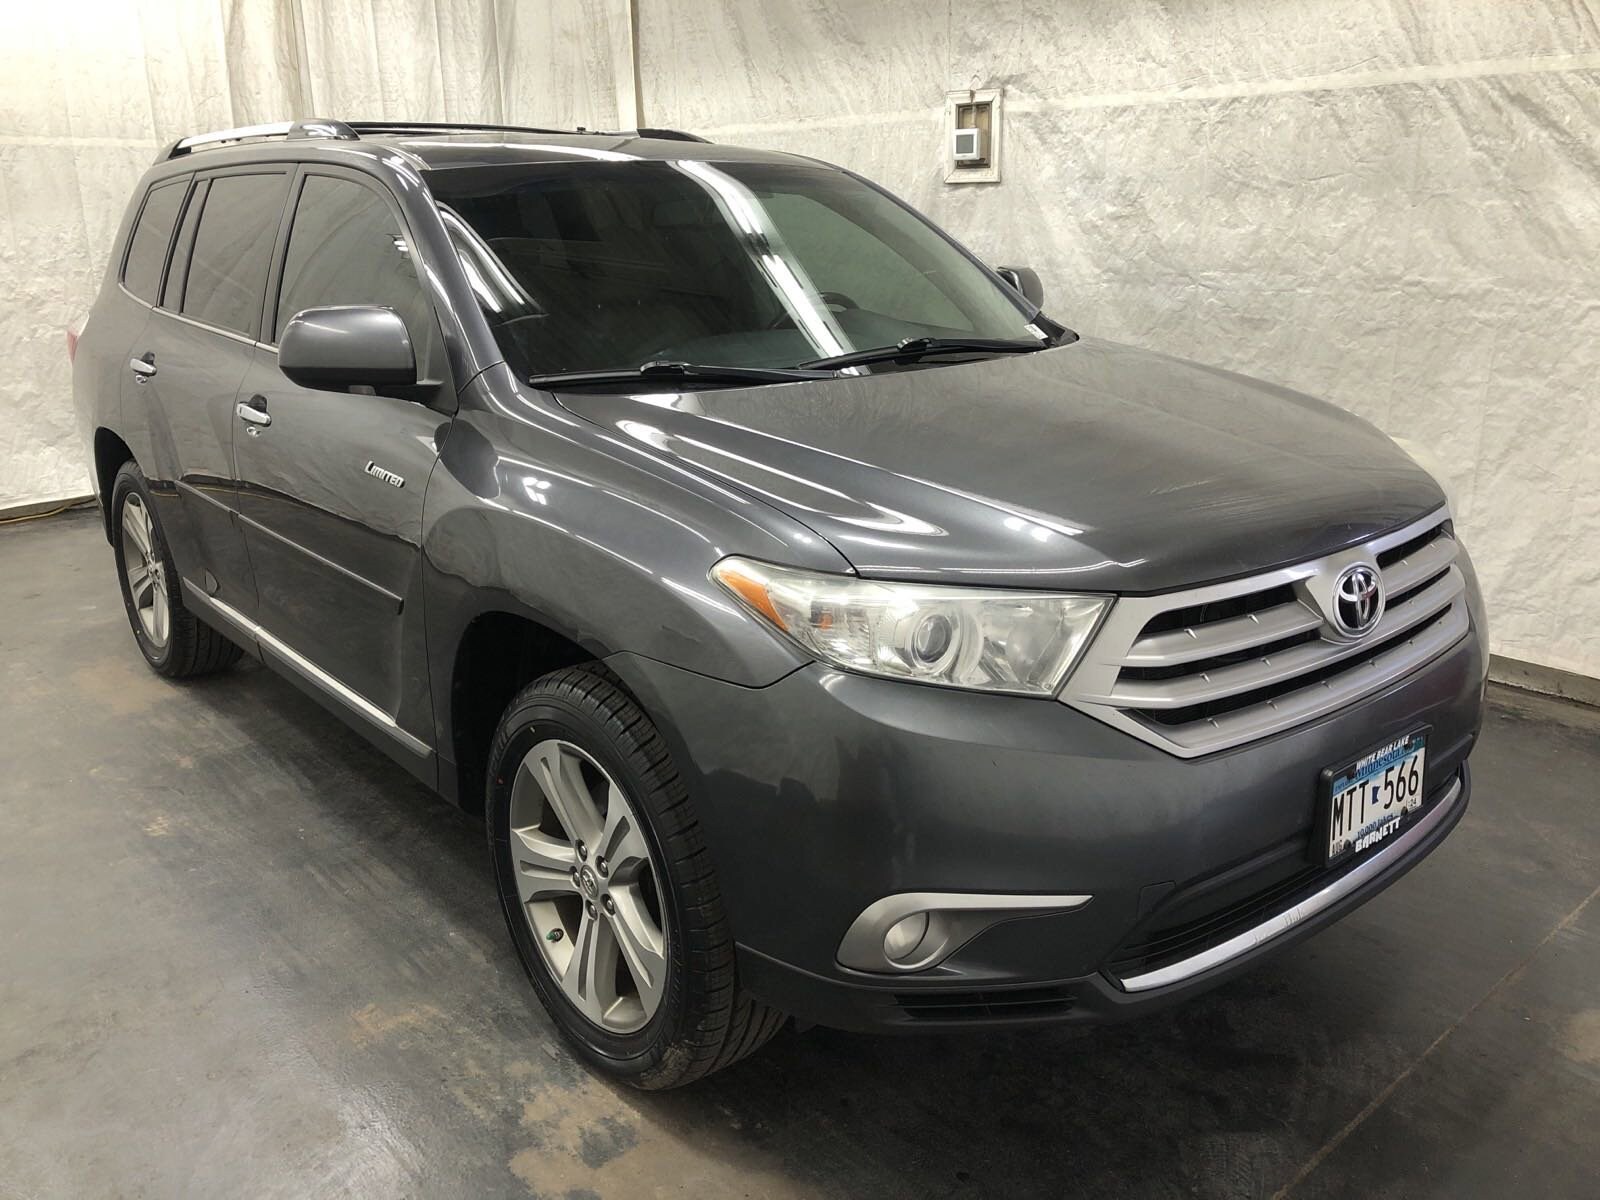 Used 2011 Toyota Highlander Limited with VIN 5TDDK3EH9BS078286 for sale in White Bear Lake, MN